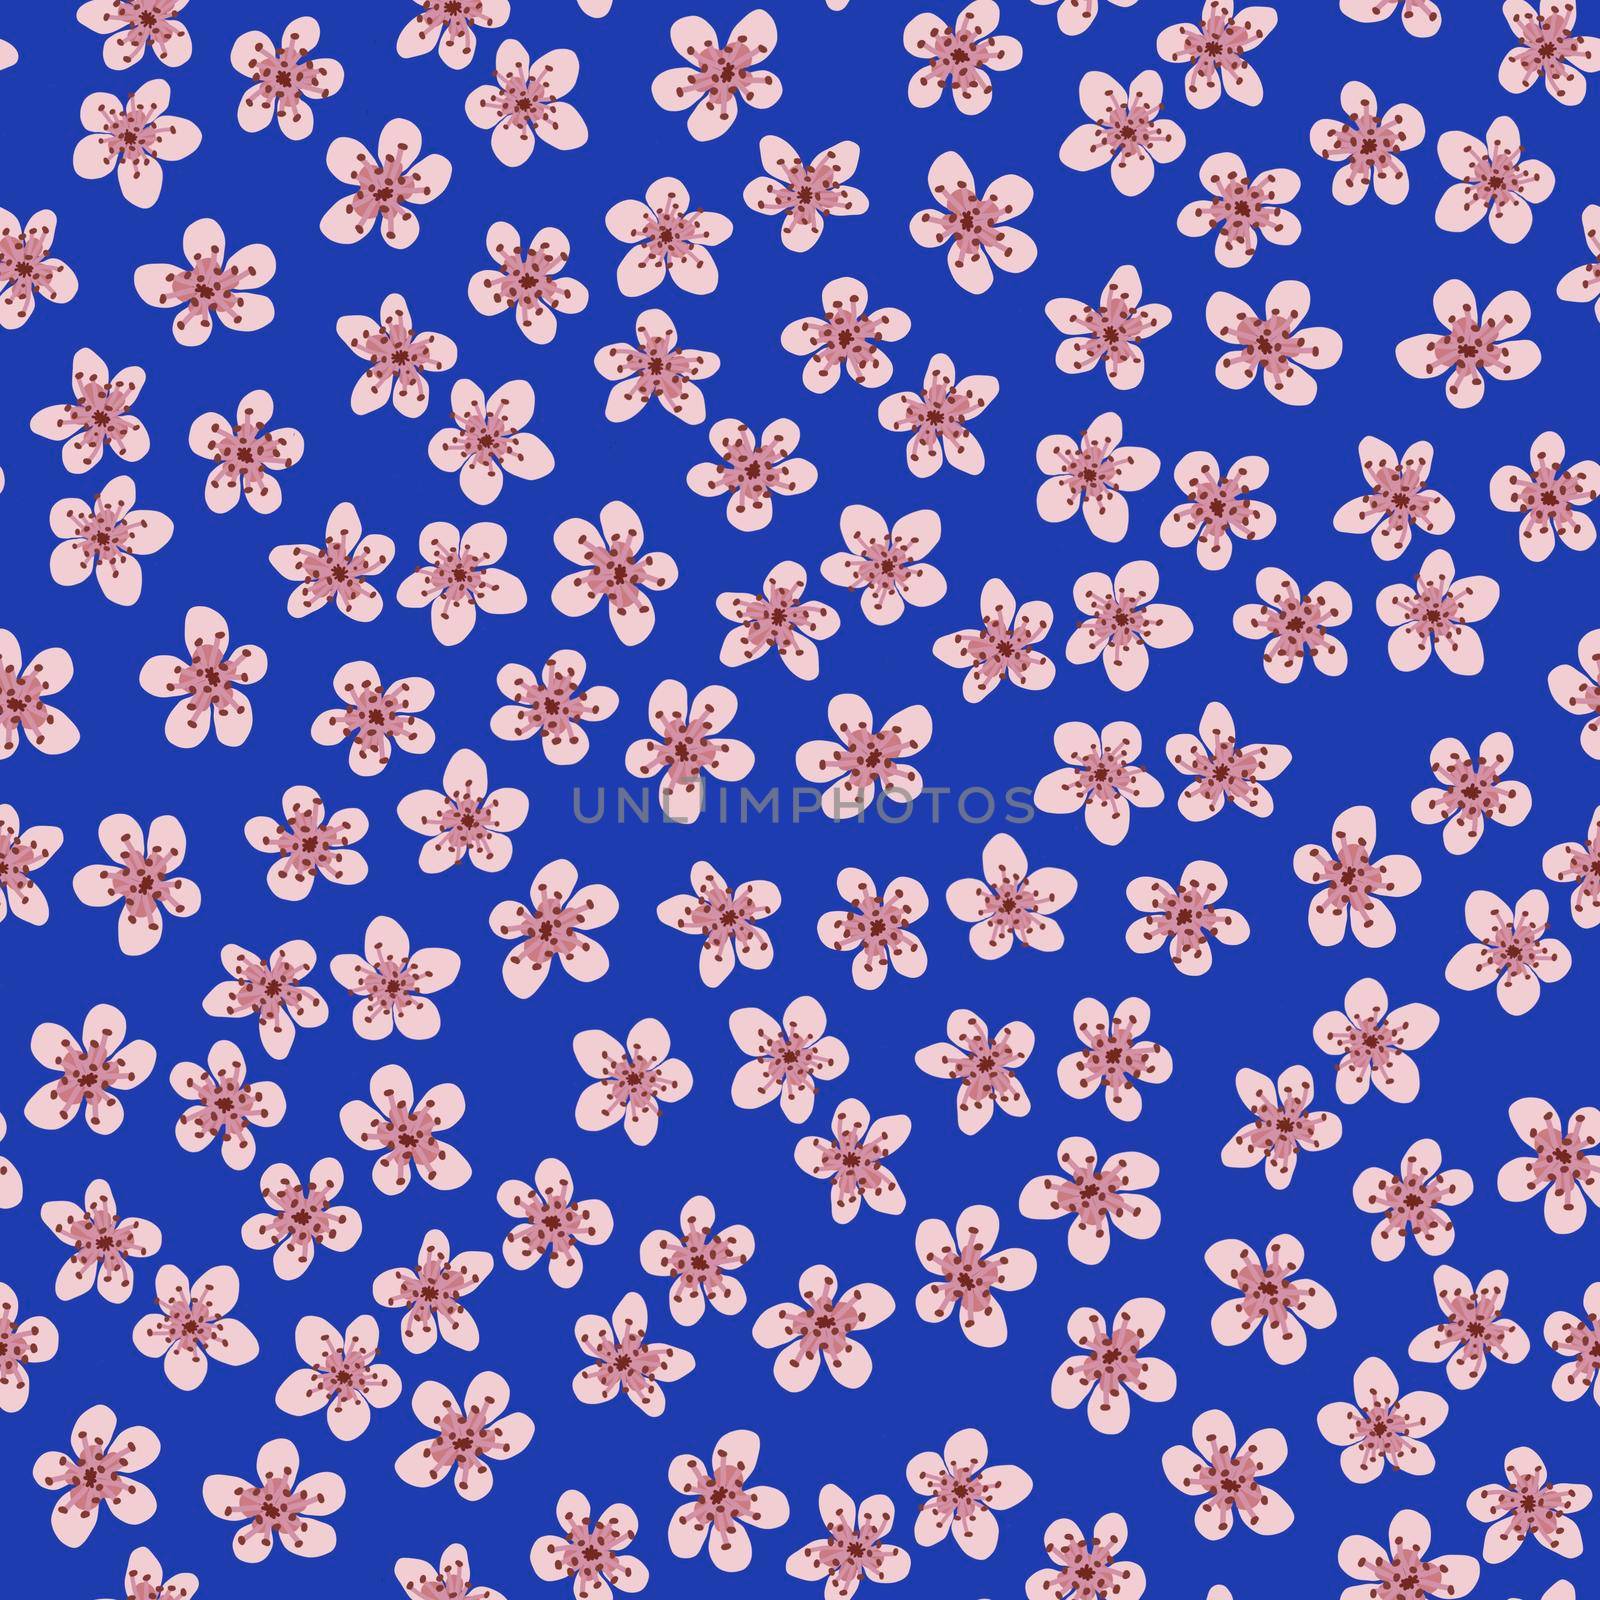 Seamless pattern with blossoming Japanese cherry sakura for fabric, packaging, wallpaper, textile decor, design, invitations, print, gift wrap, manufacturing. Pink flowers on blue background. by Angelsmoon